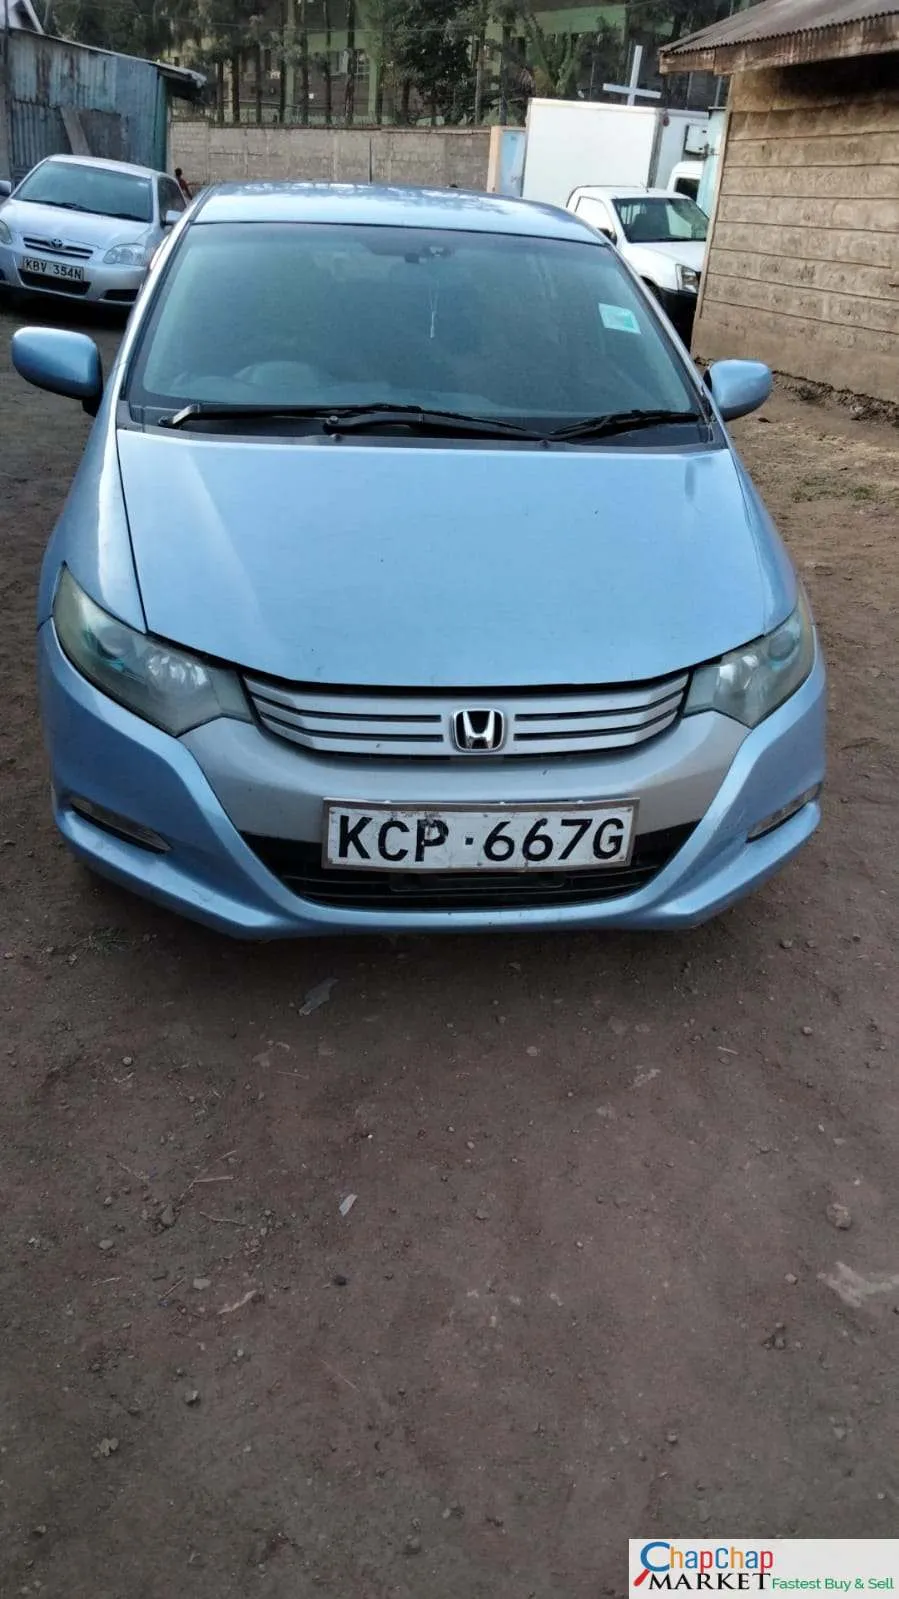 Honda insight for sale in kenya hire purchase installments You Pay 30% Deposit Trade in OK Wow hybrid hire purchase installments